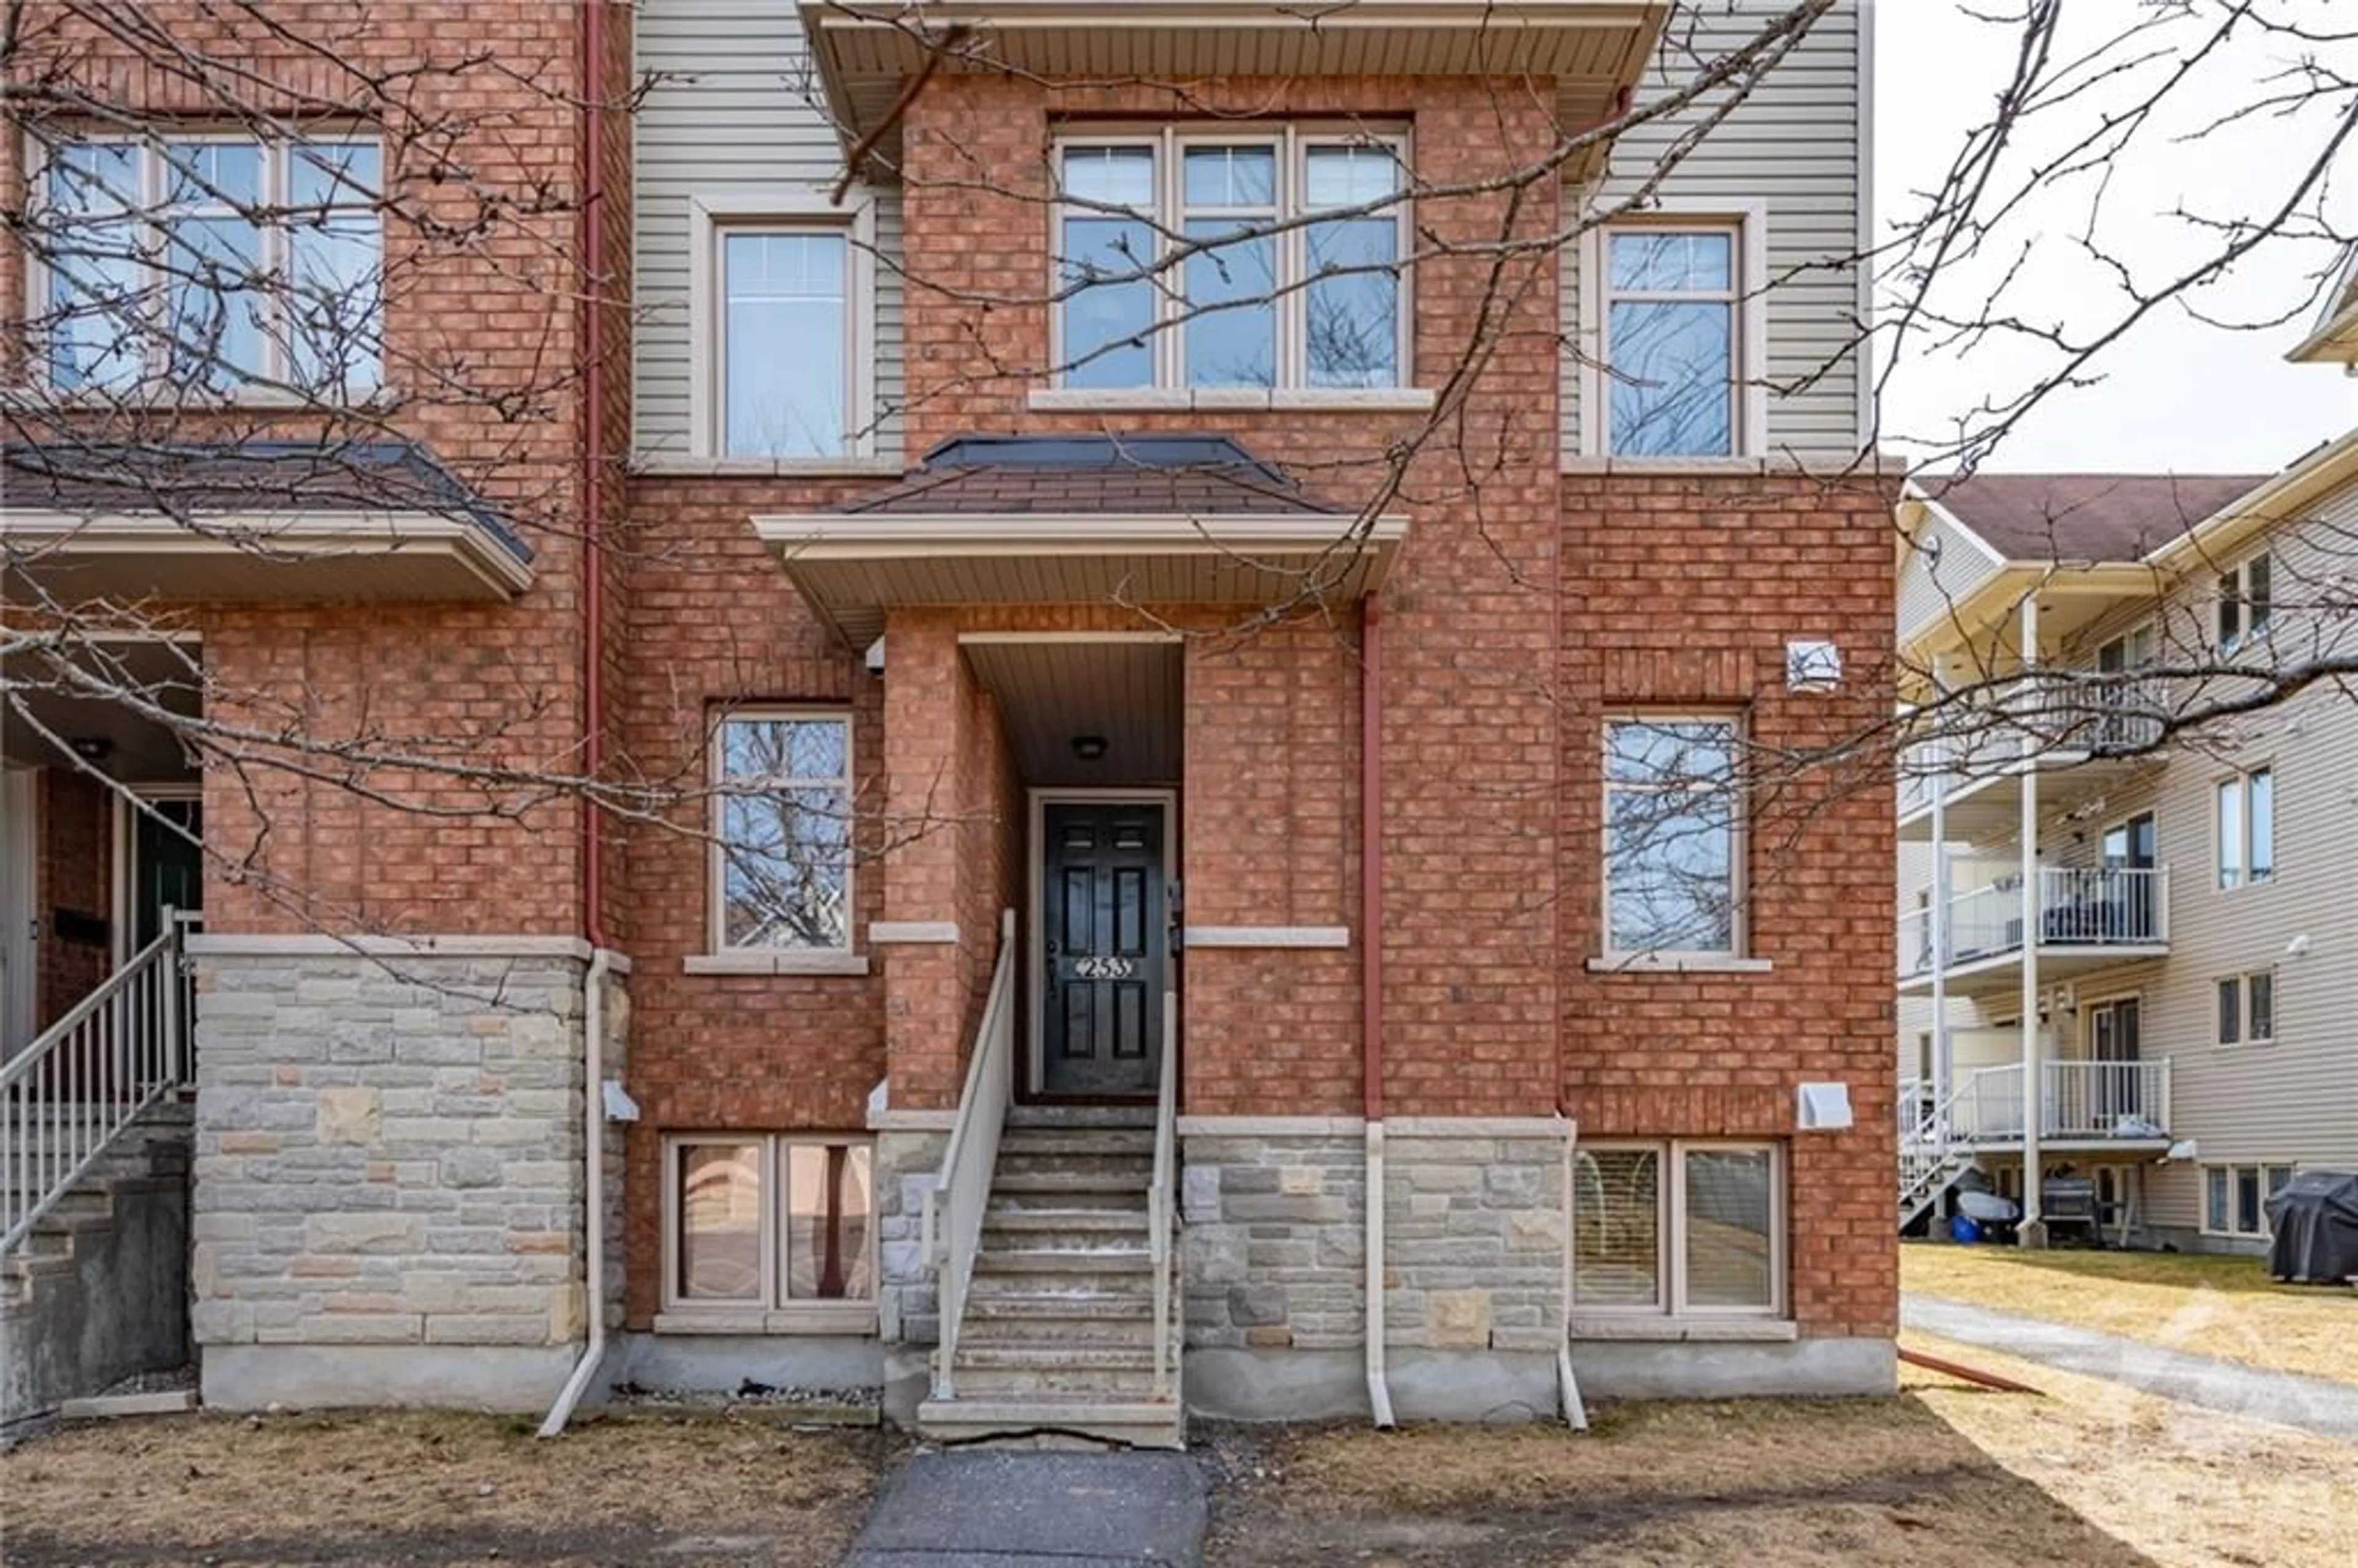 Home with brick exterior material for 255 DEERCROFT Ave, Ottawa Ontario K2J 5J9